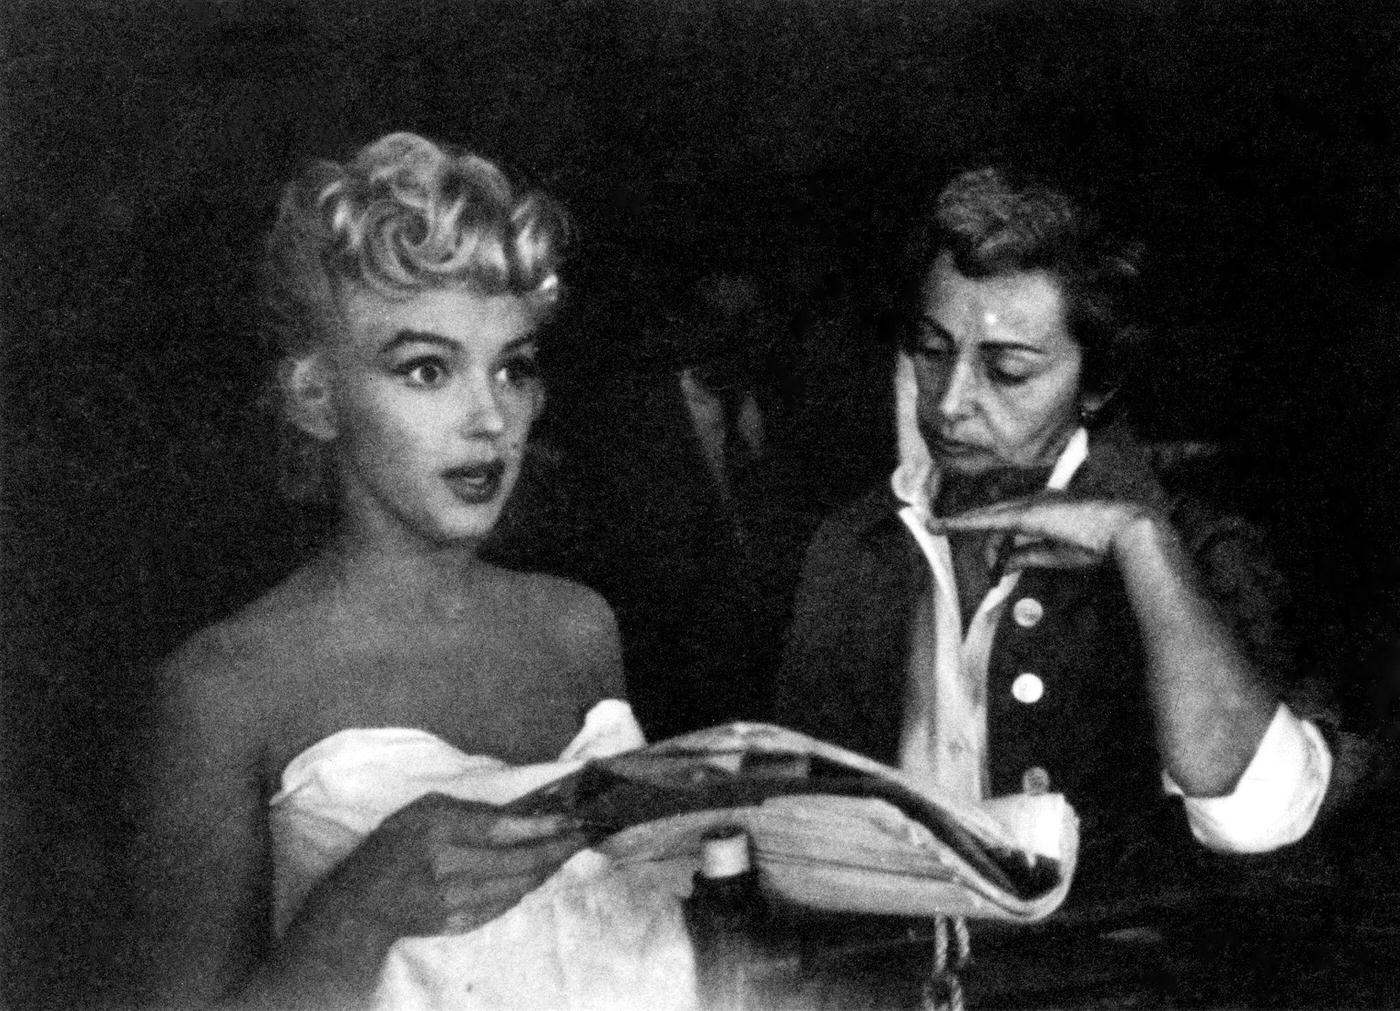 Marilyn Monroe prepares for a bathtub scene with Columbia Pictures drama coach Natasha Lytess in 1954 during the filming of "The Seven Year Itch"